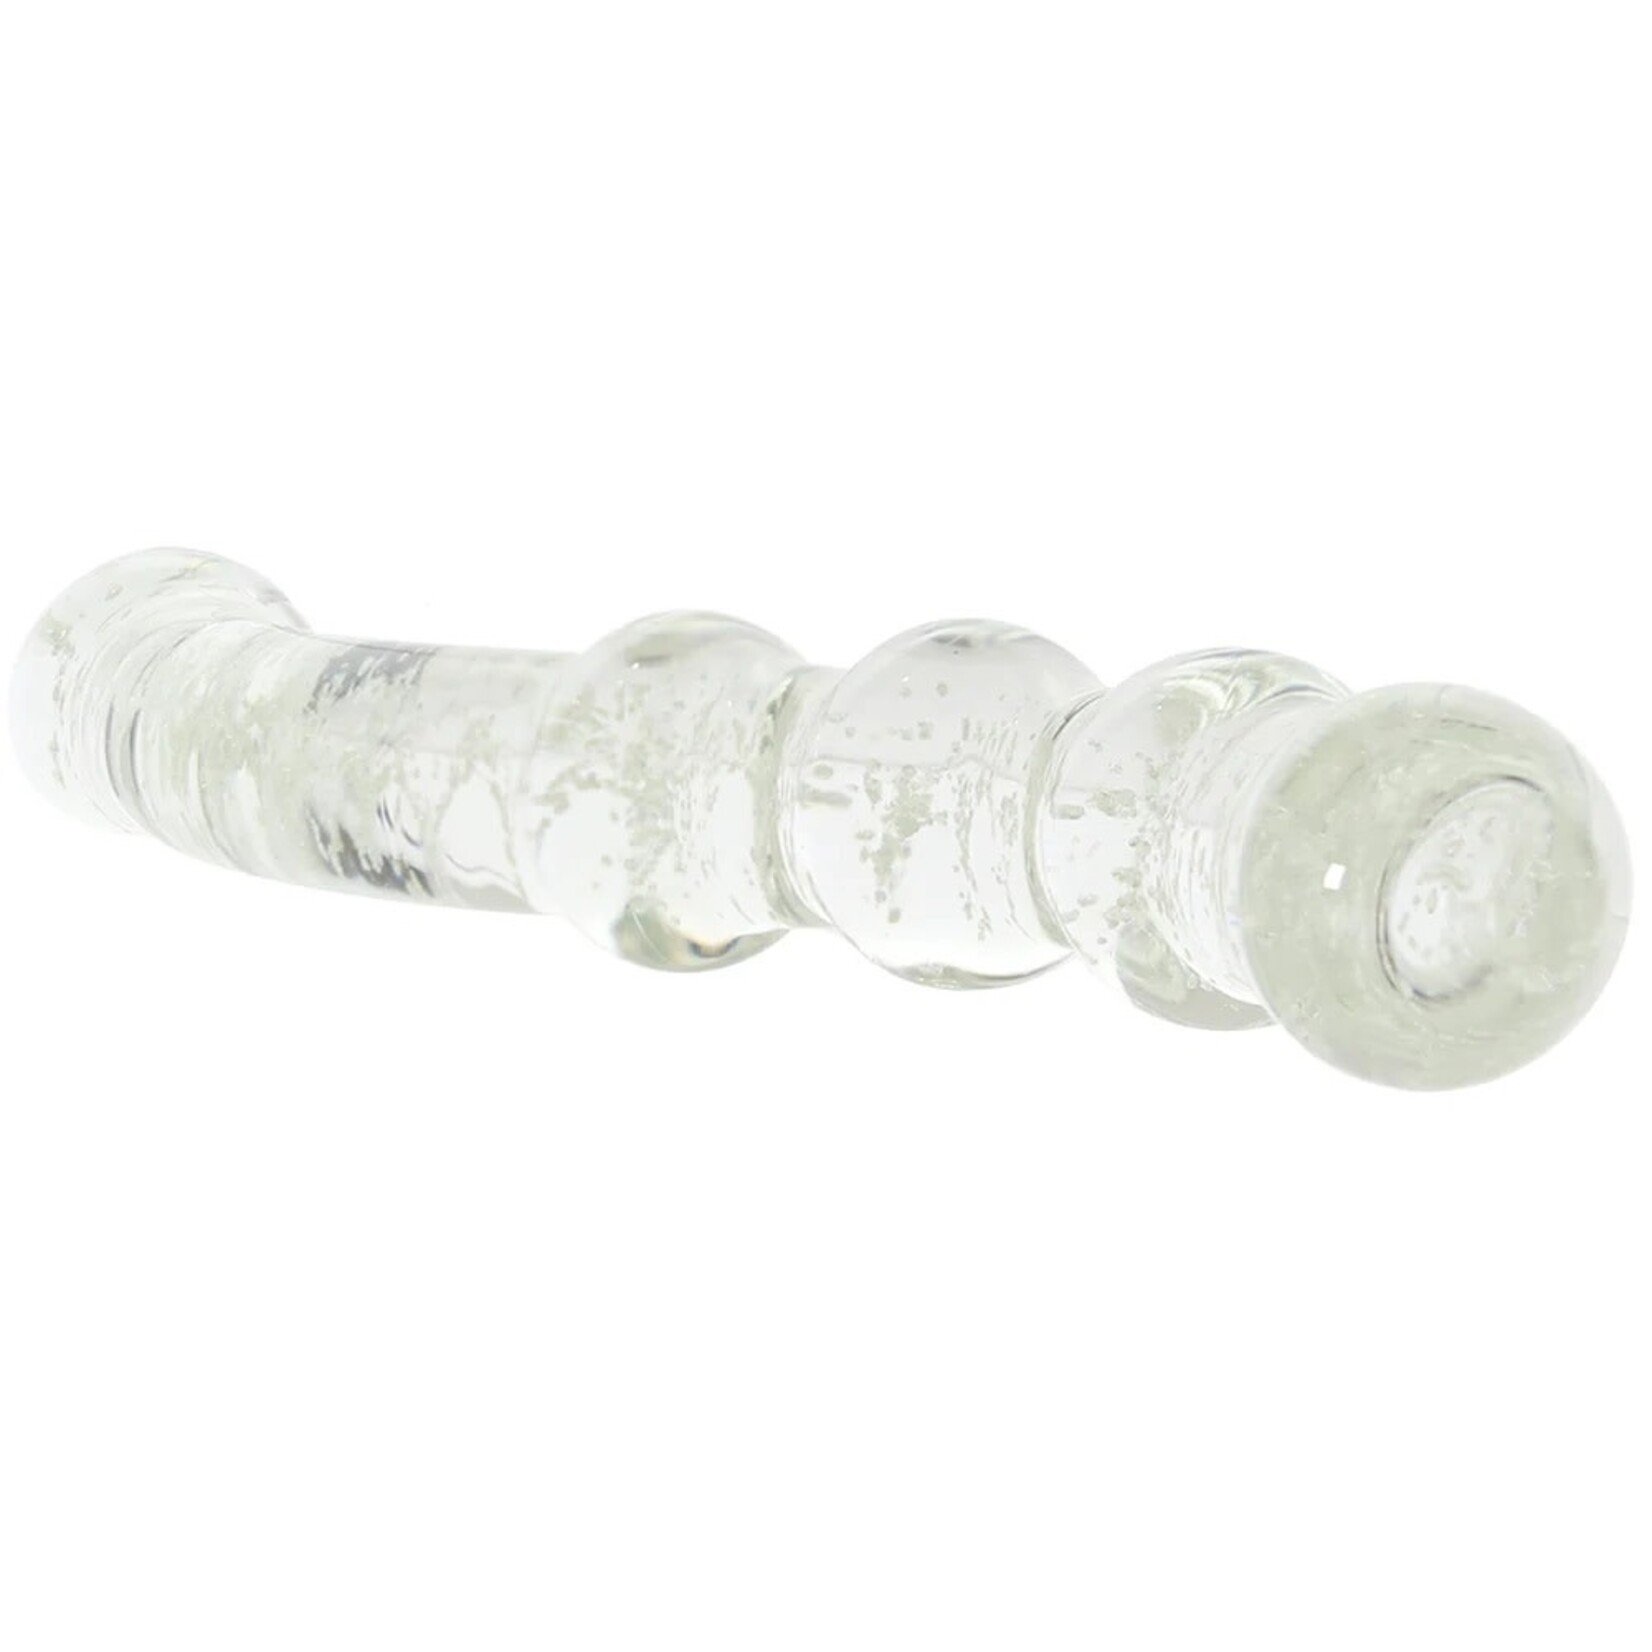 WHIPSMART GLOW IN THE DARK BEADED GLASS DOUBLE DILDO